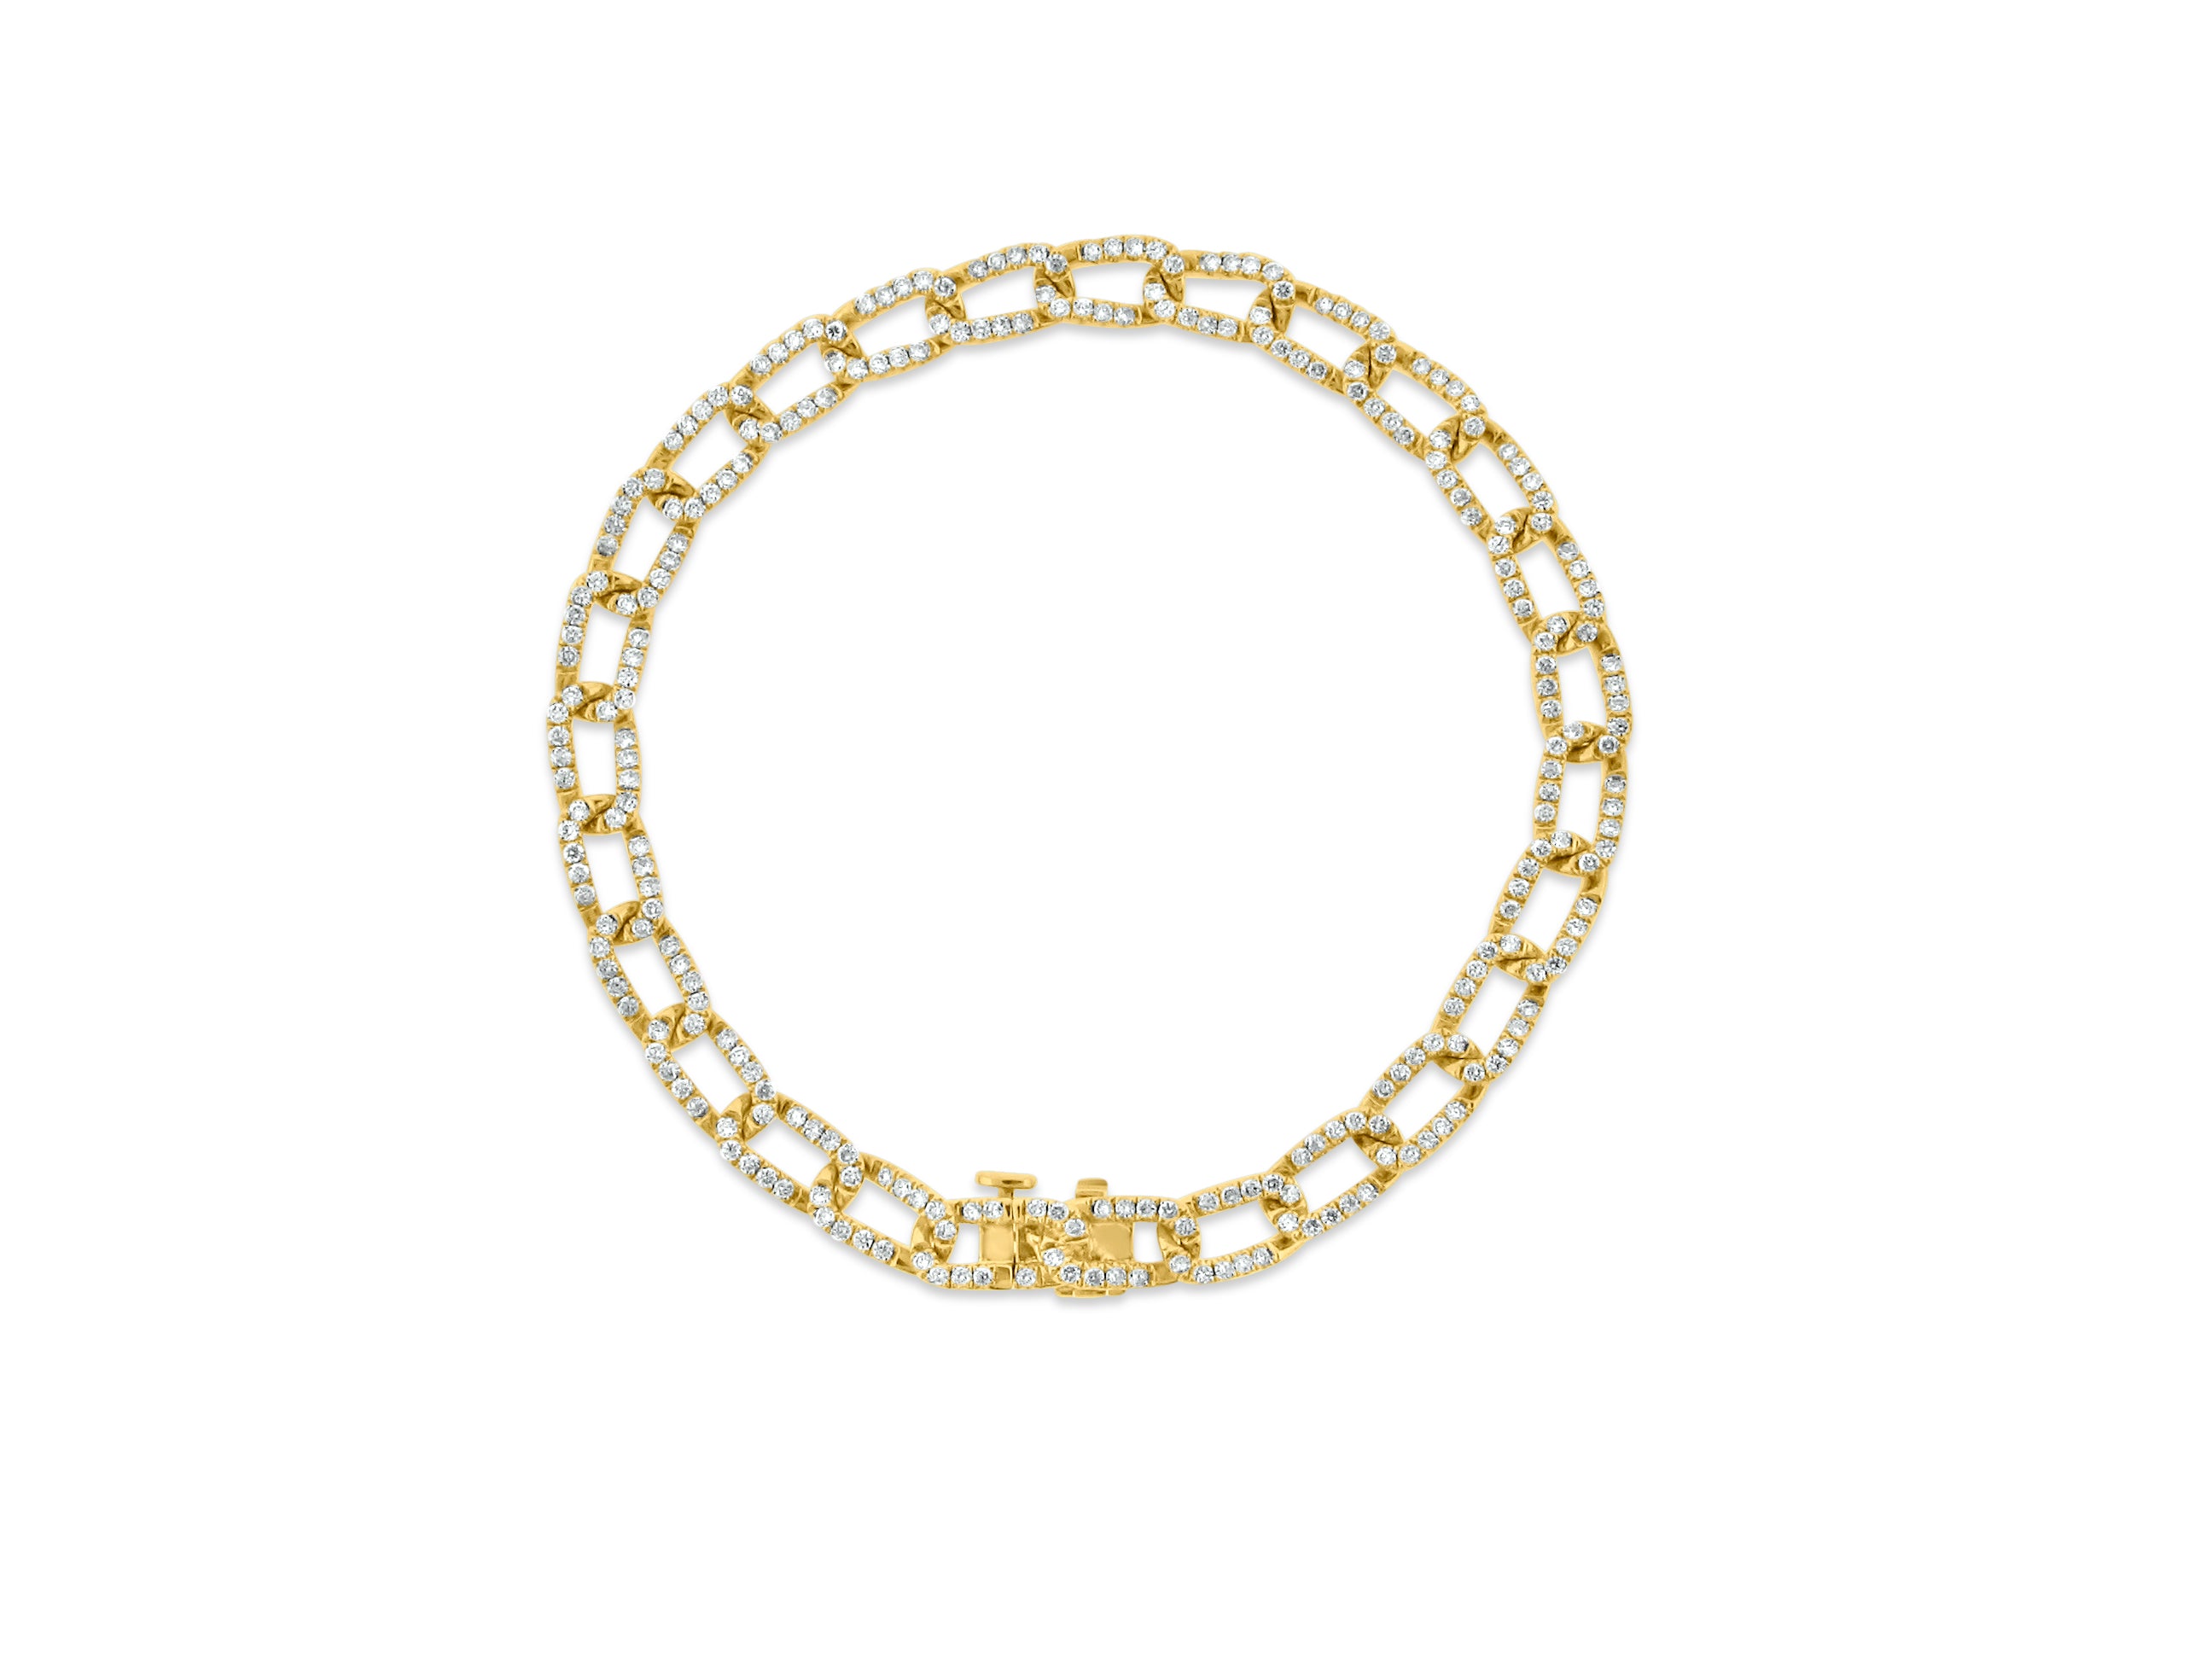 MULLOYS PRIVE'14K YELLOW GOLD 2.73CT SI1-2 CLARITY G-H COLOR DIAMOND CLASSIC LINK BRACELET